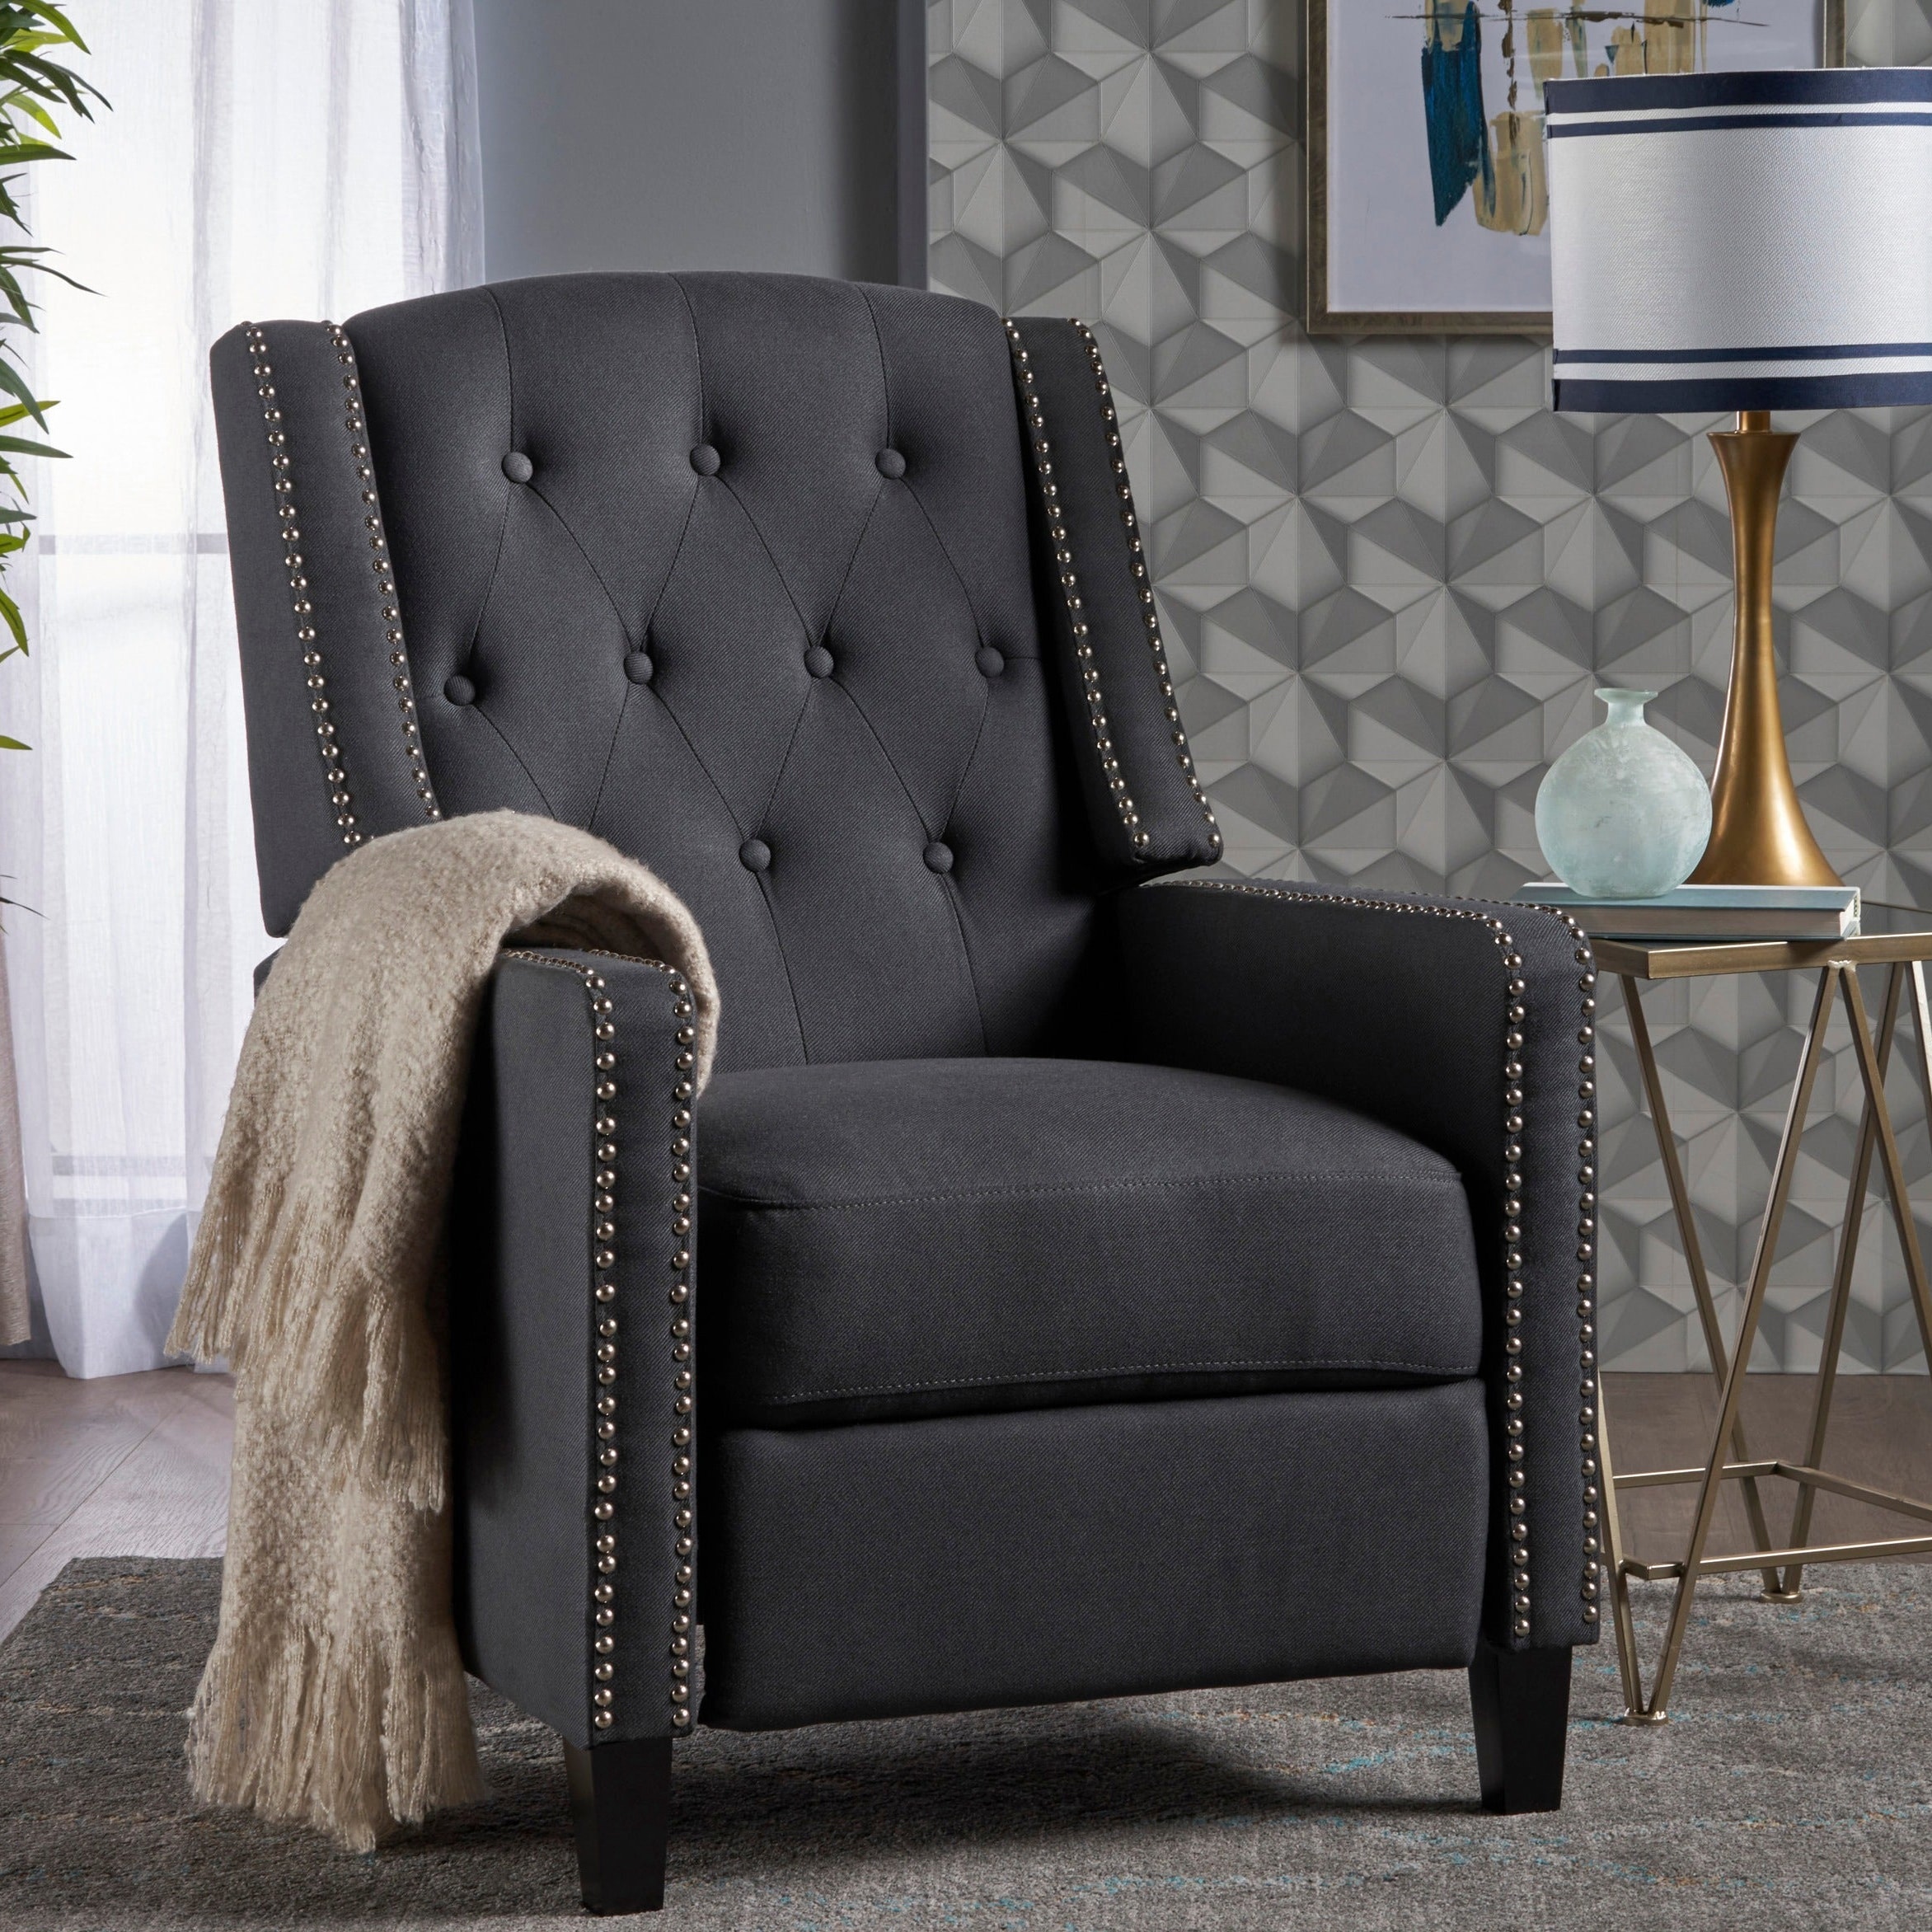 Dark Brown Christopher Knight Home Cerelia Tufted Fabric Recliner Dark Charcoal 